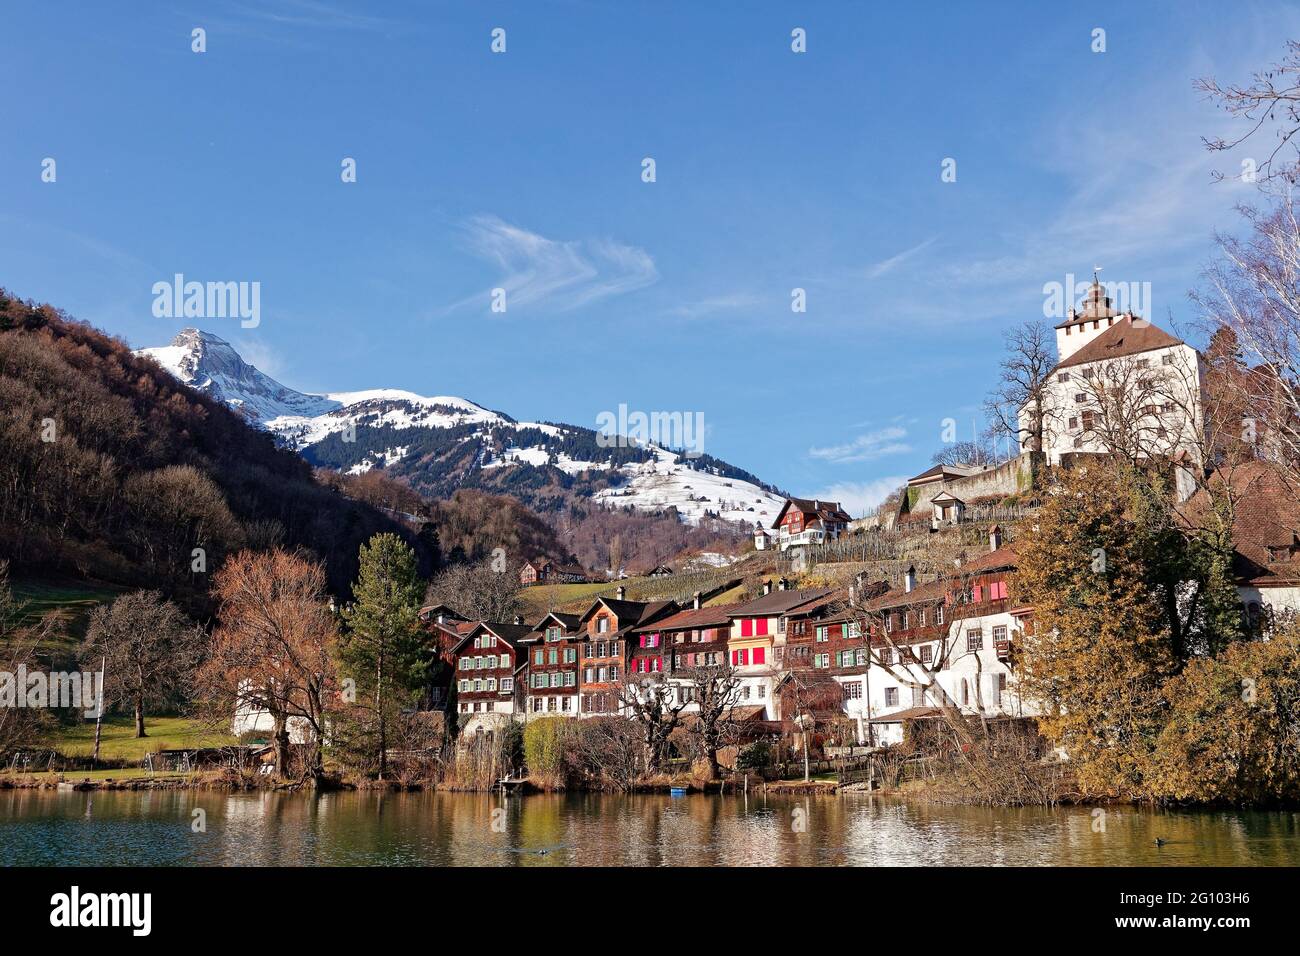 Historical village Werdenberg with castle and lake Stock Photo